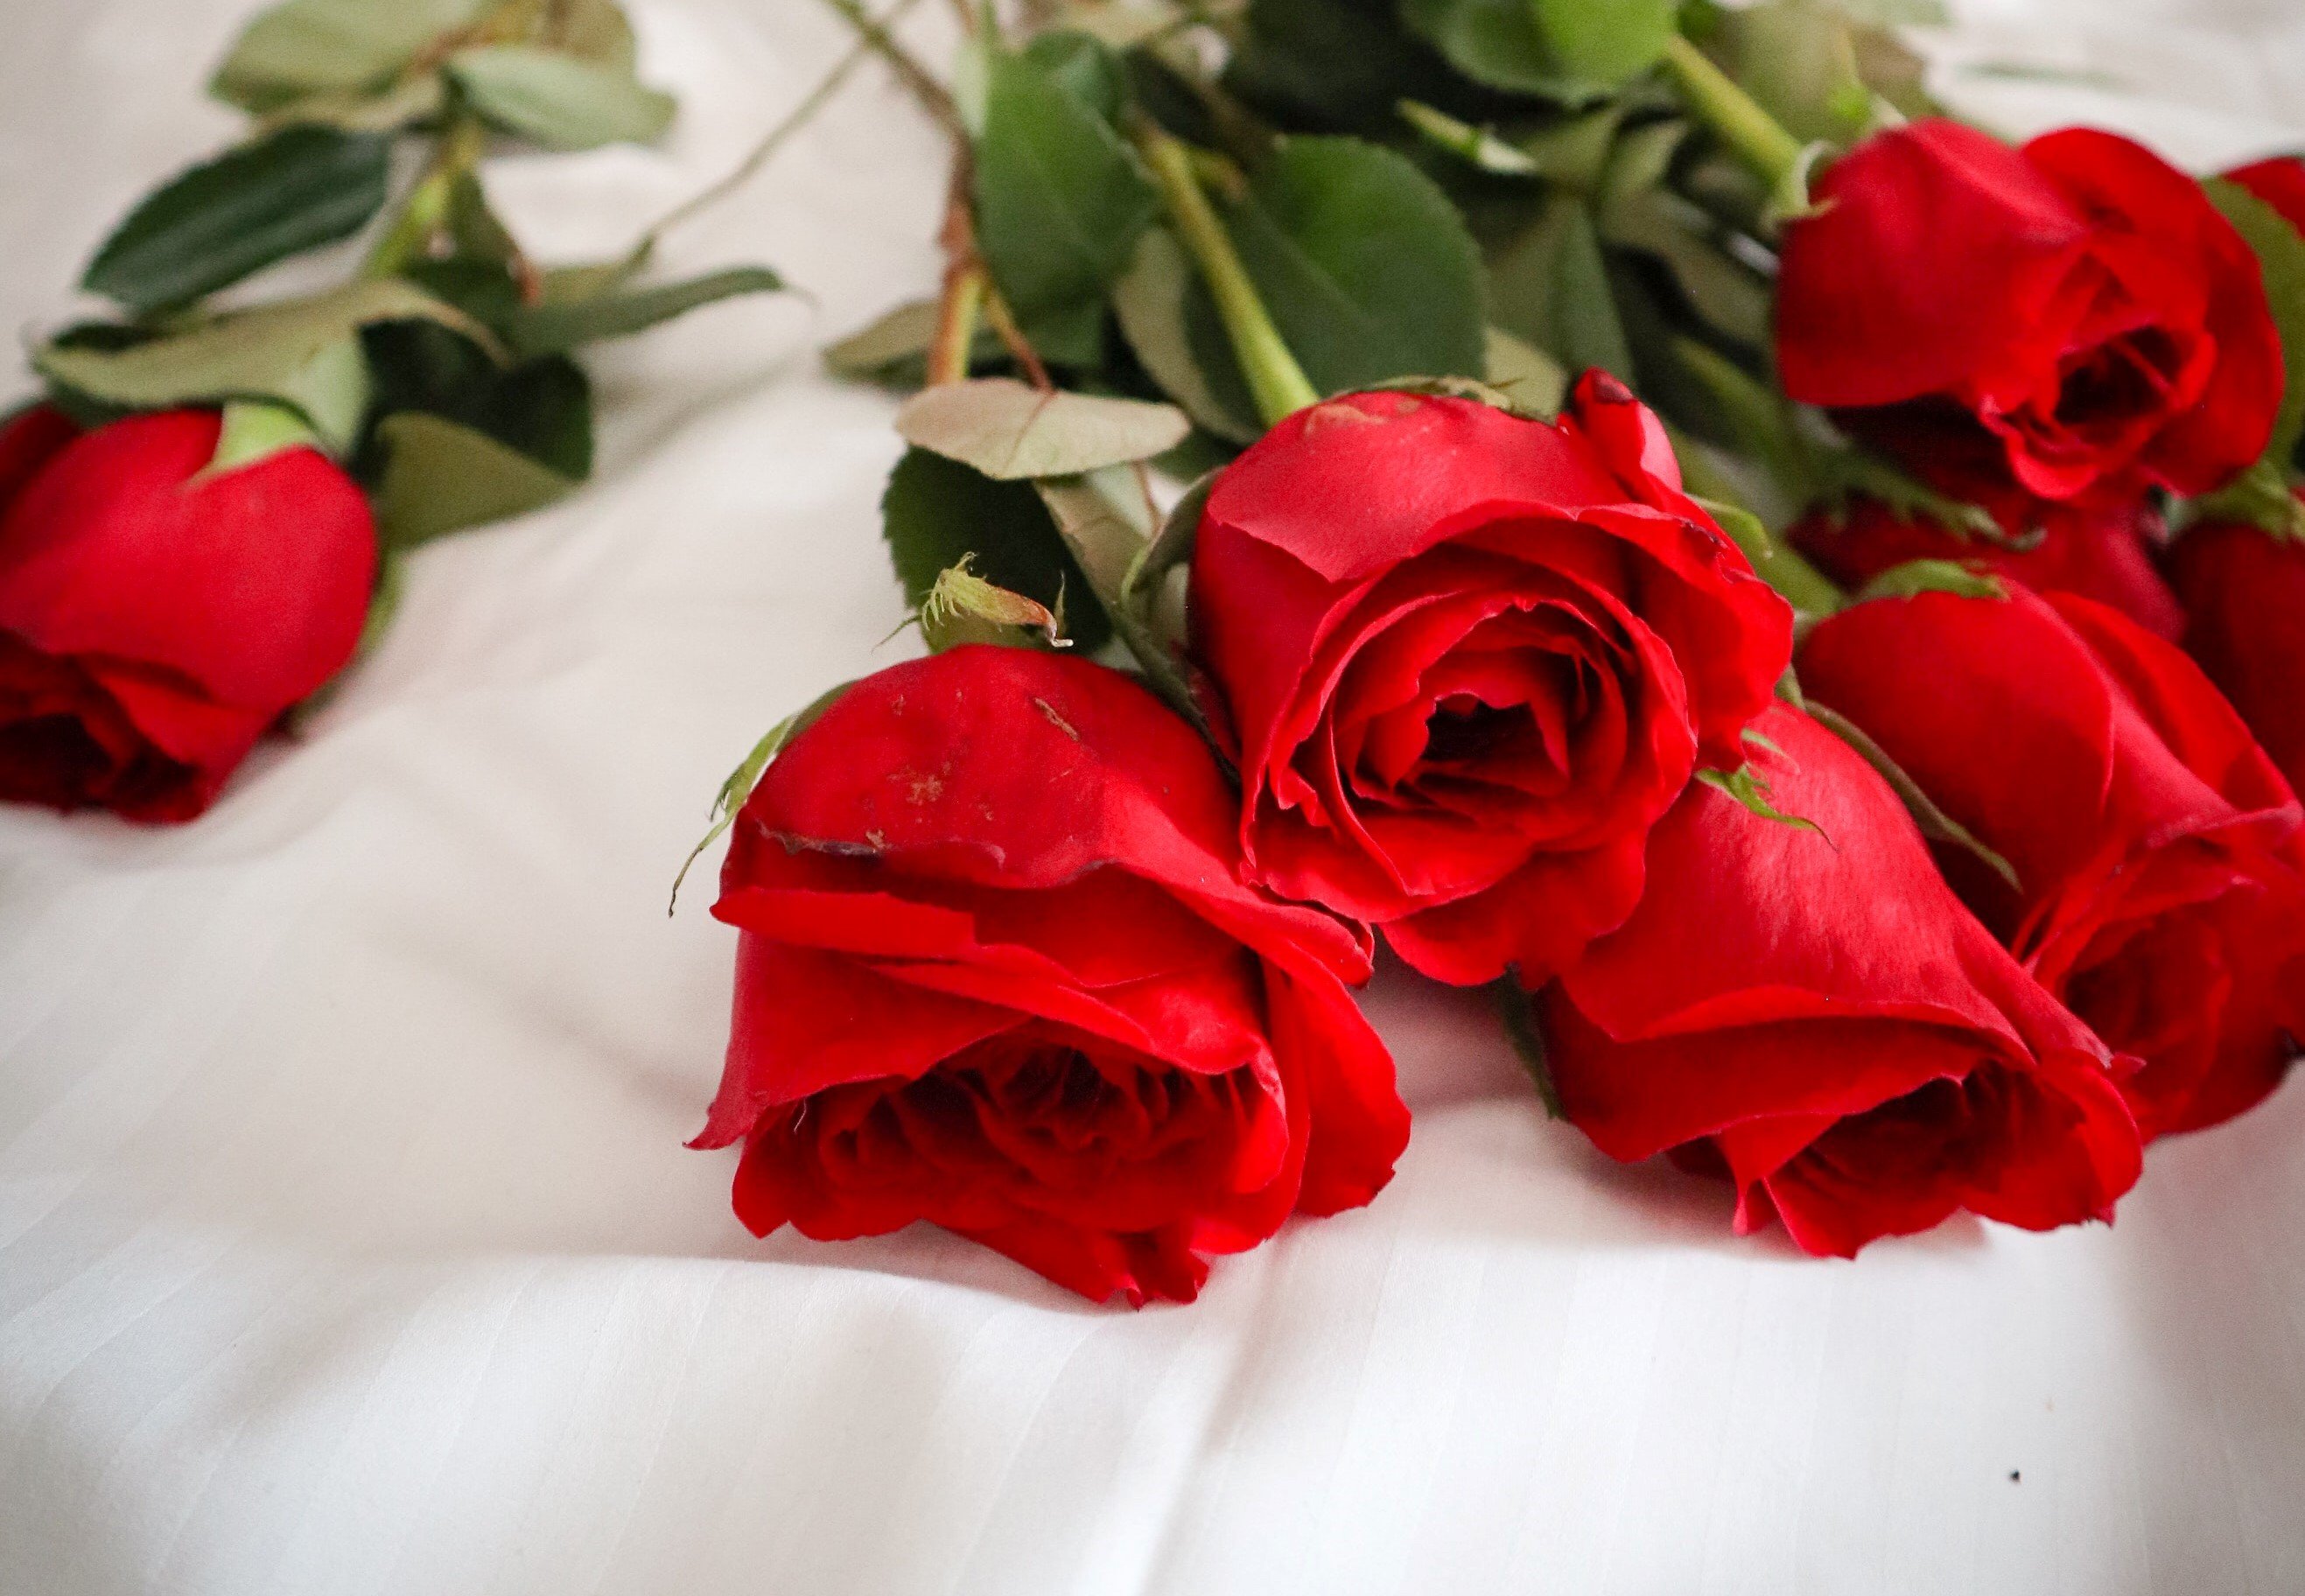 The next morning, Adam was stunned to find a bouquet of red roses with a note from Stacey on his bed. | Source: Unsplash